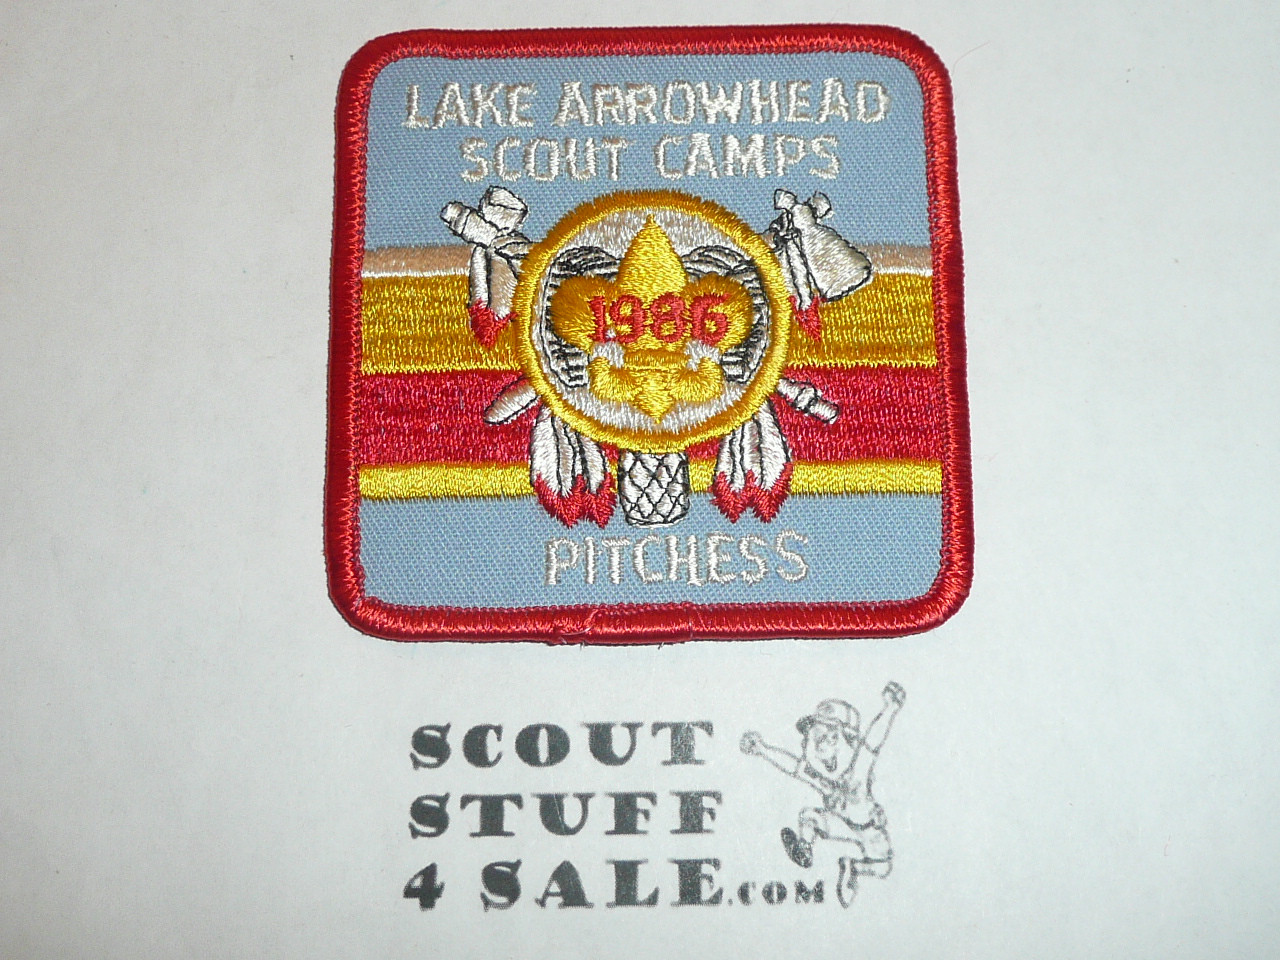 Lake Arrowhead Scout Camps, Camp Pitchess Patch, 1986